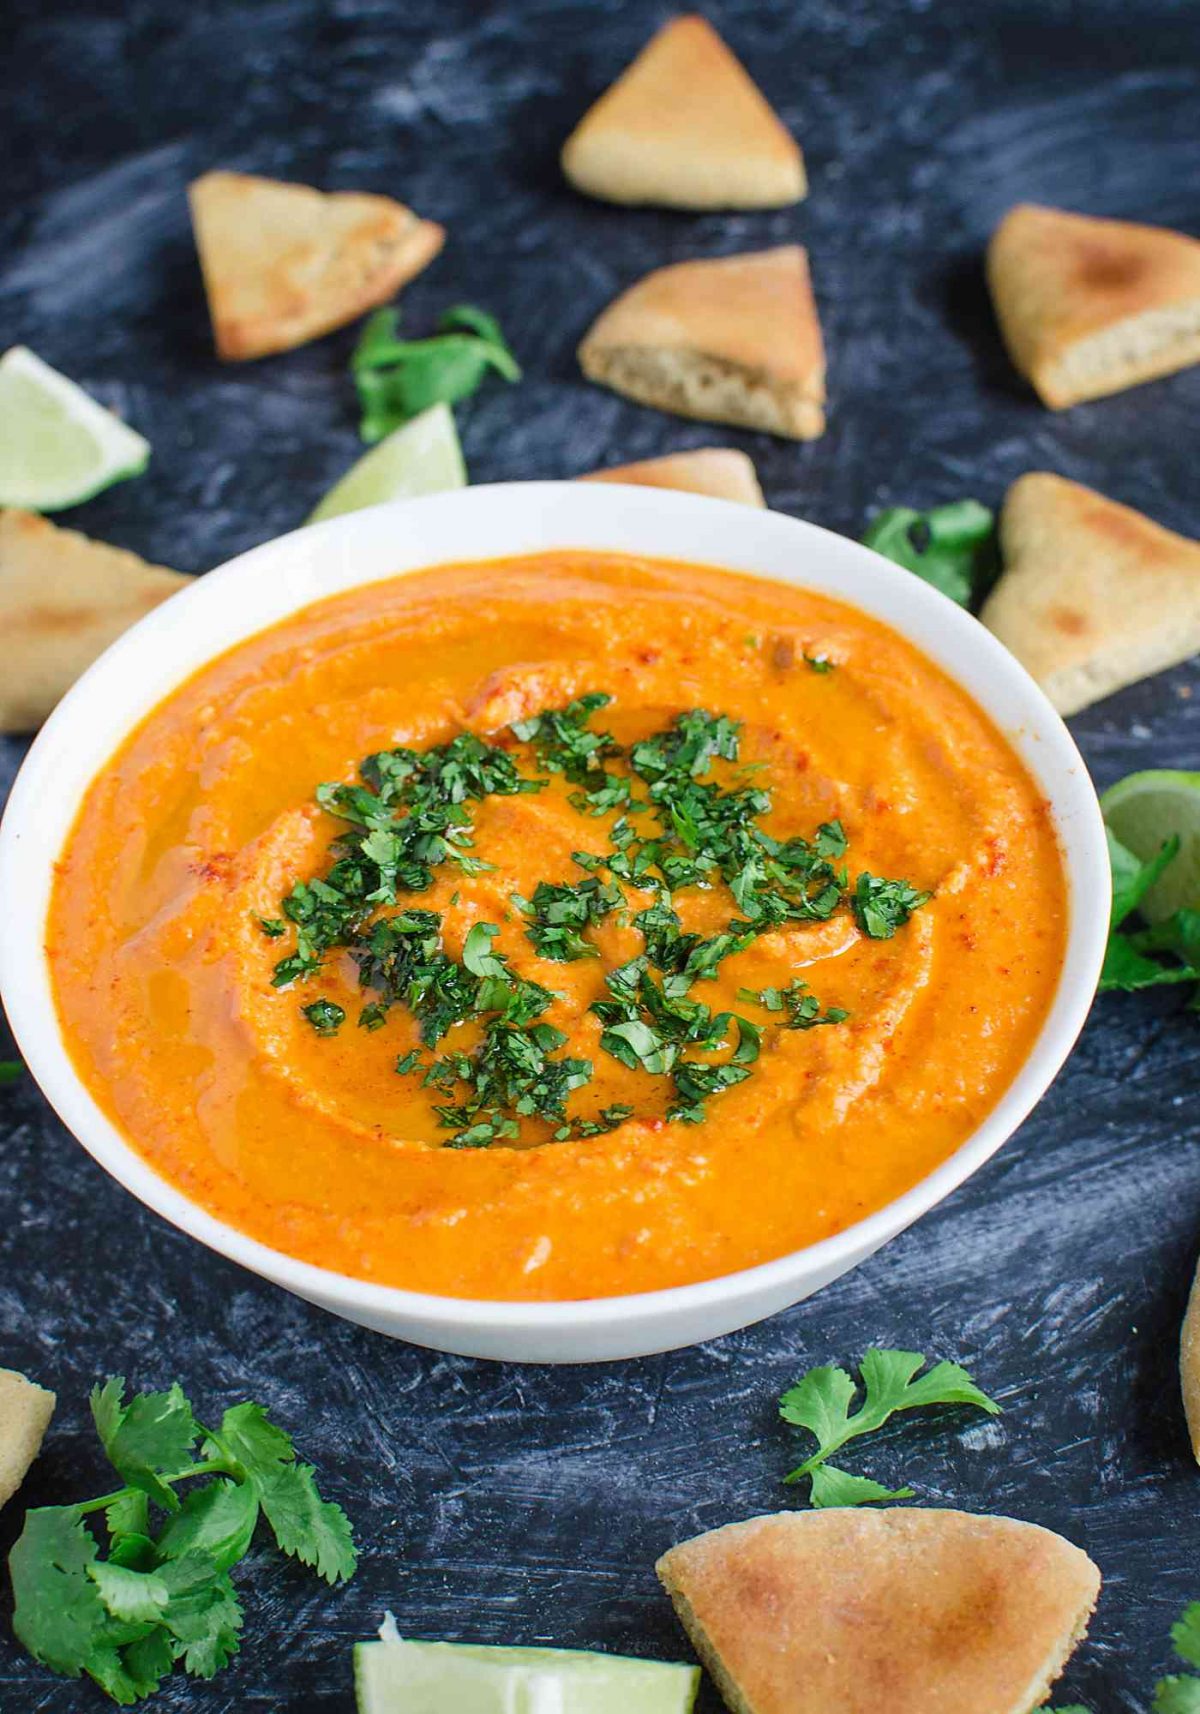 Easy homemade hummus prepared using roasted red peppers. @watchwhatueat